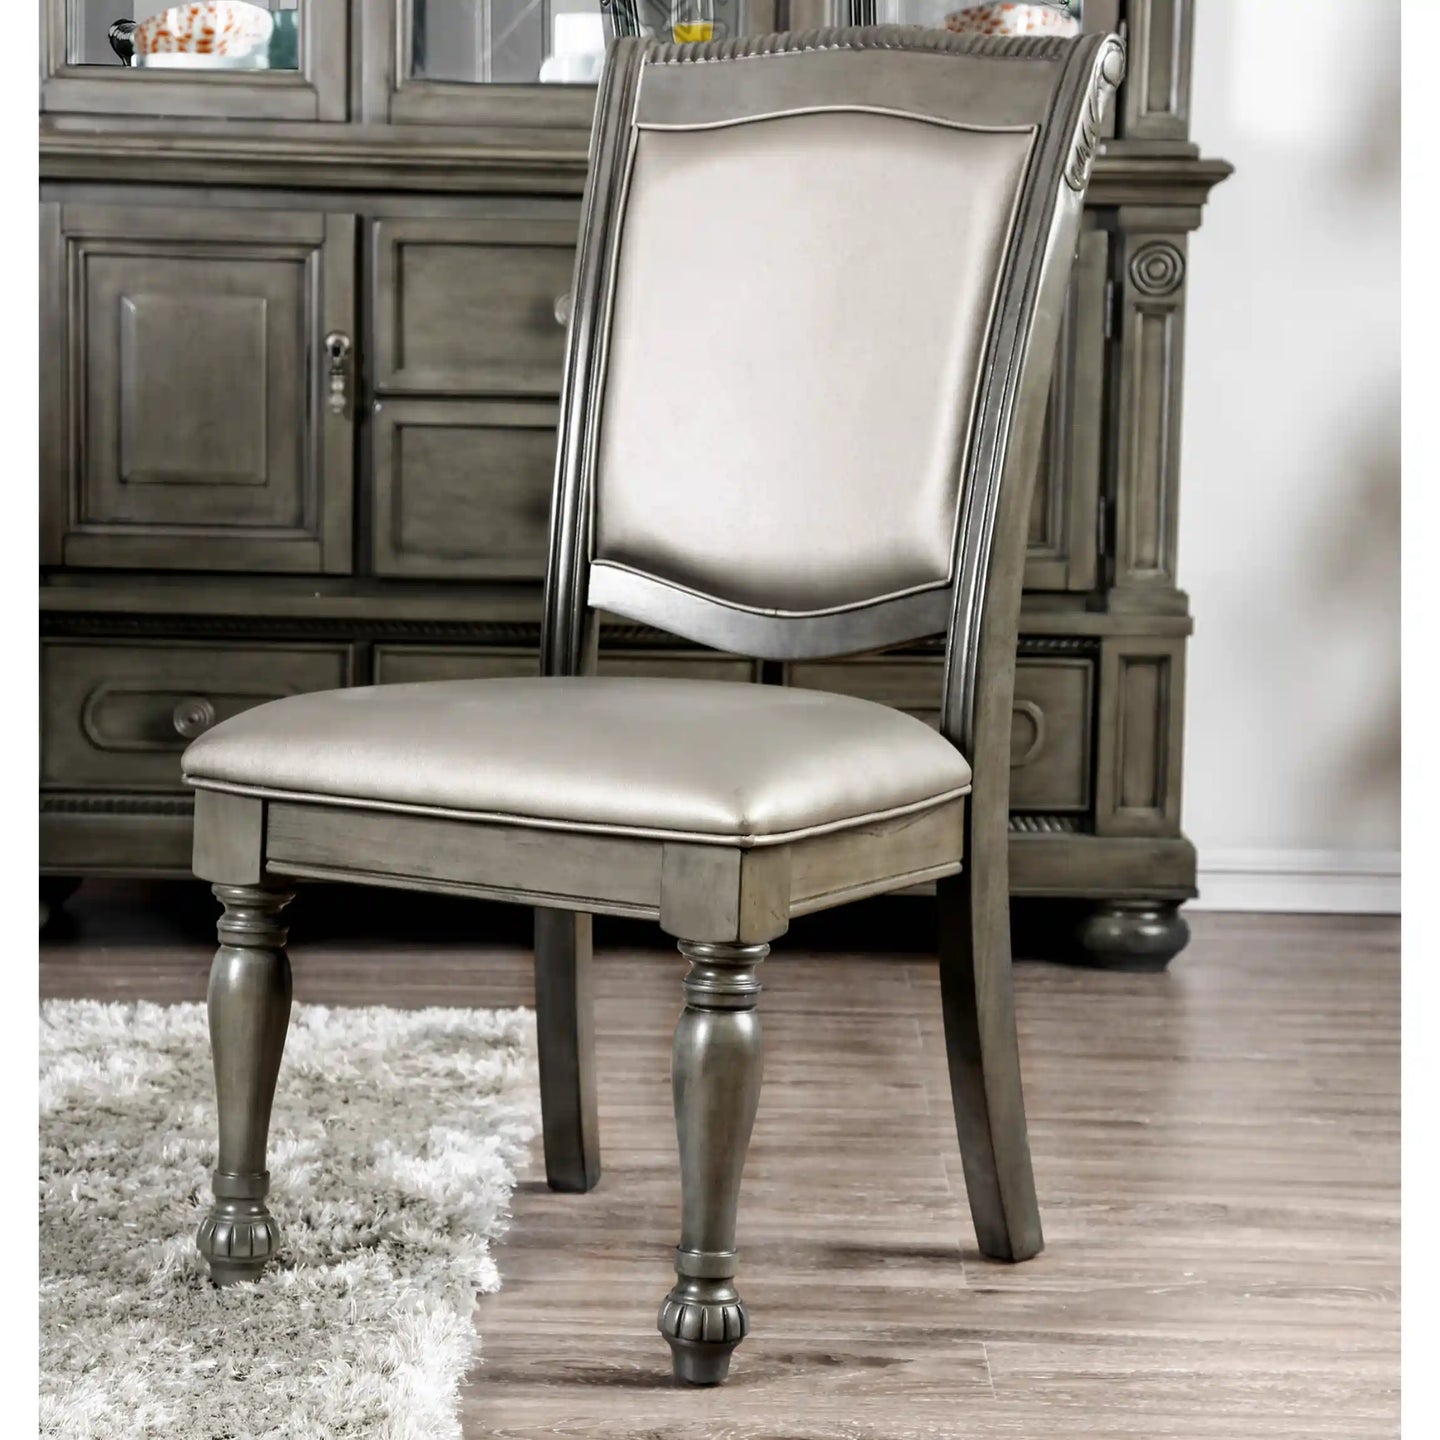 Furniture of America Noela Transitional Upholstered Side Chairs in Gray (Set of 2) - IDF-3350GY-SC